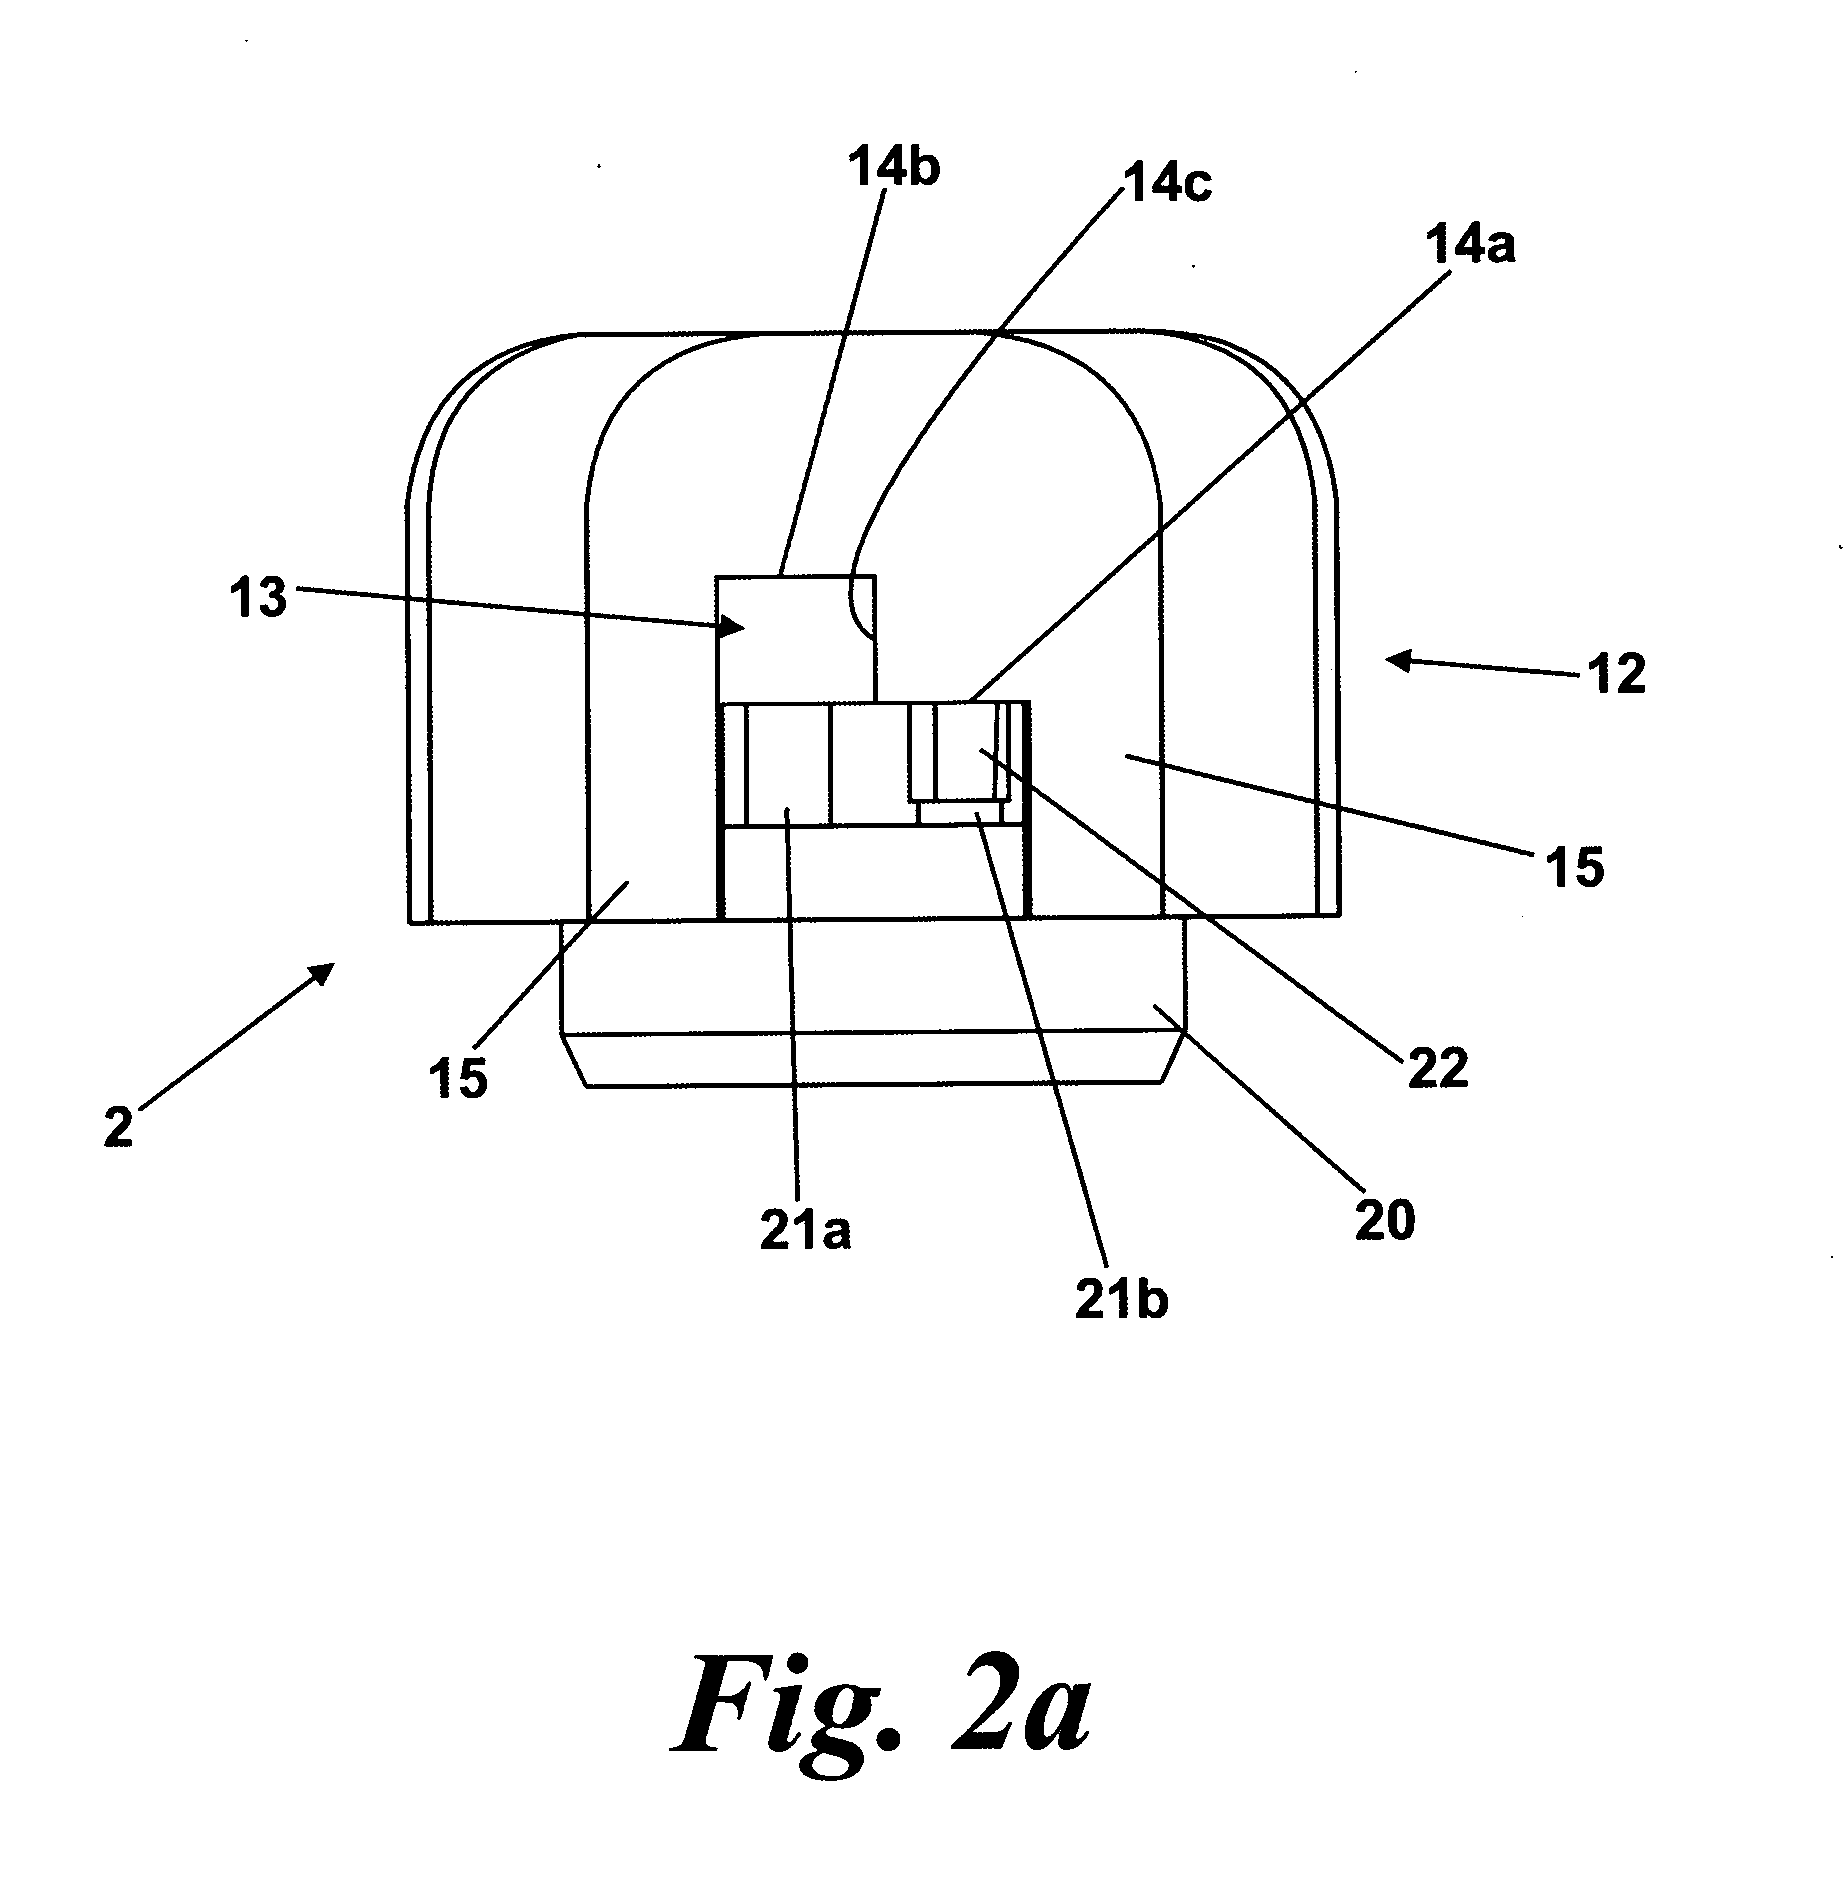 Apparatus for Producing and Delivering Open Air Factor